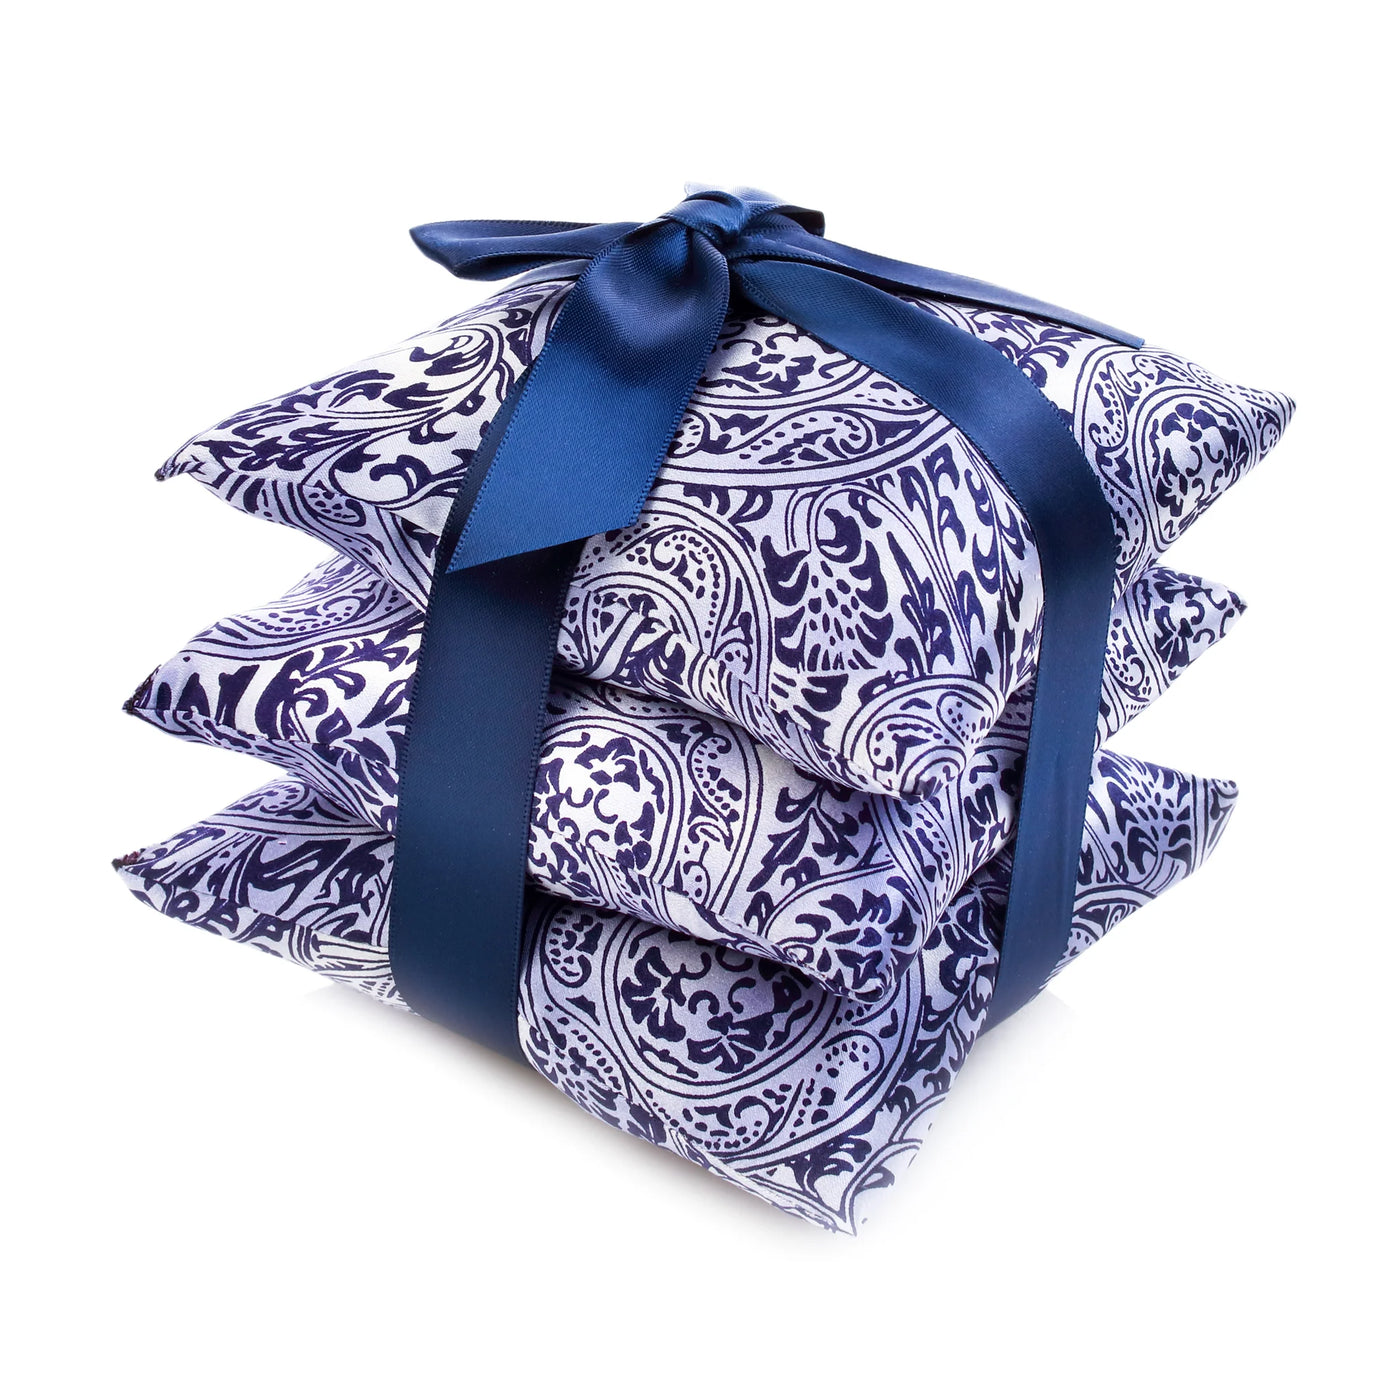 ELIZABETH W SILK SACHETS - SET OF 3 (Available in 8 Designs)